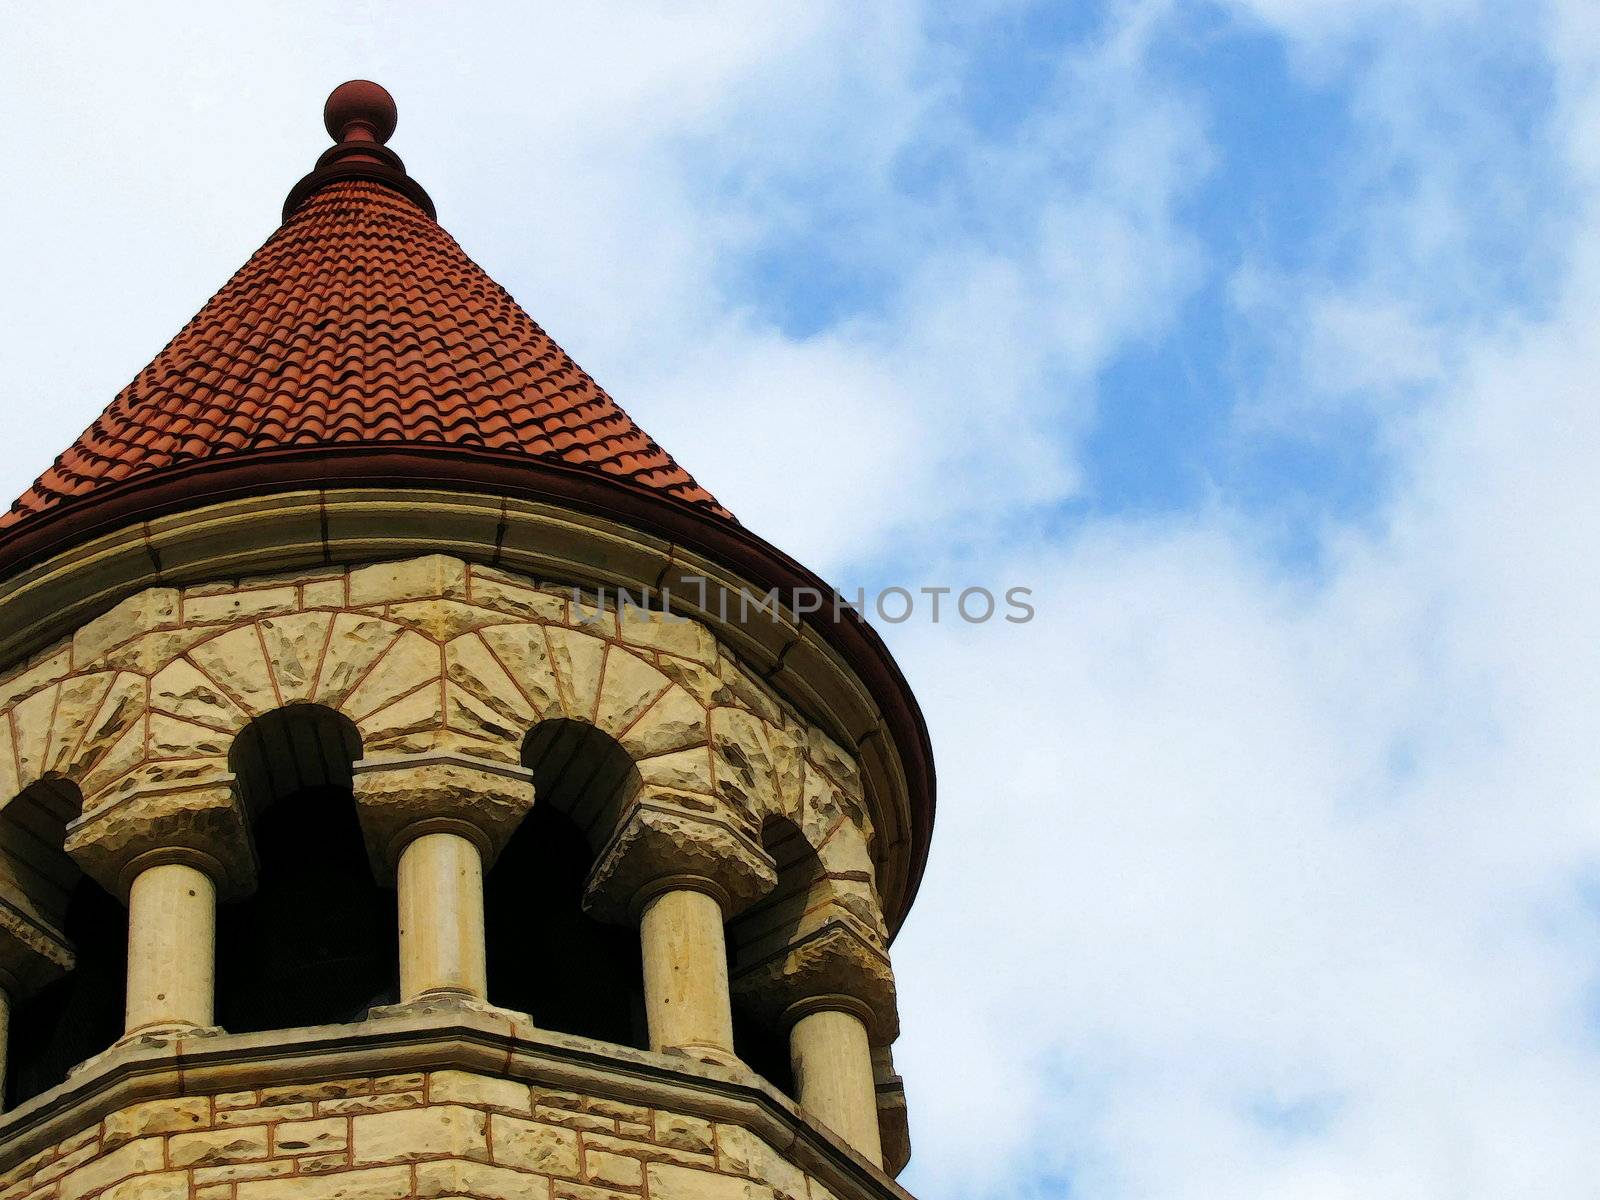 church steeple against beautiful blue sky with clouds